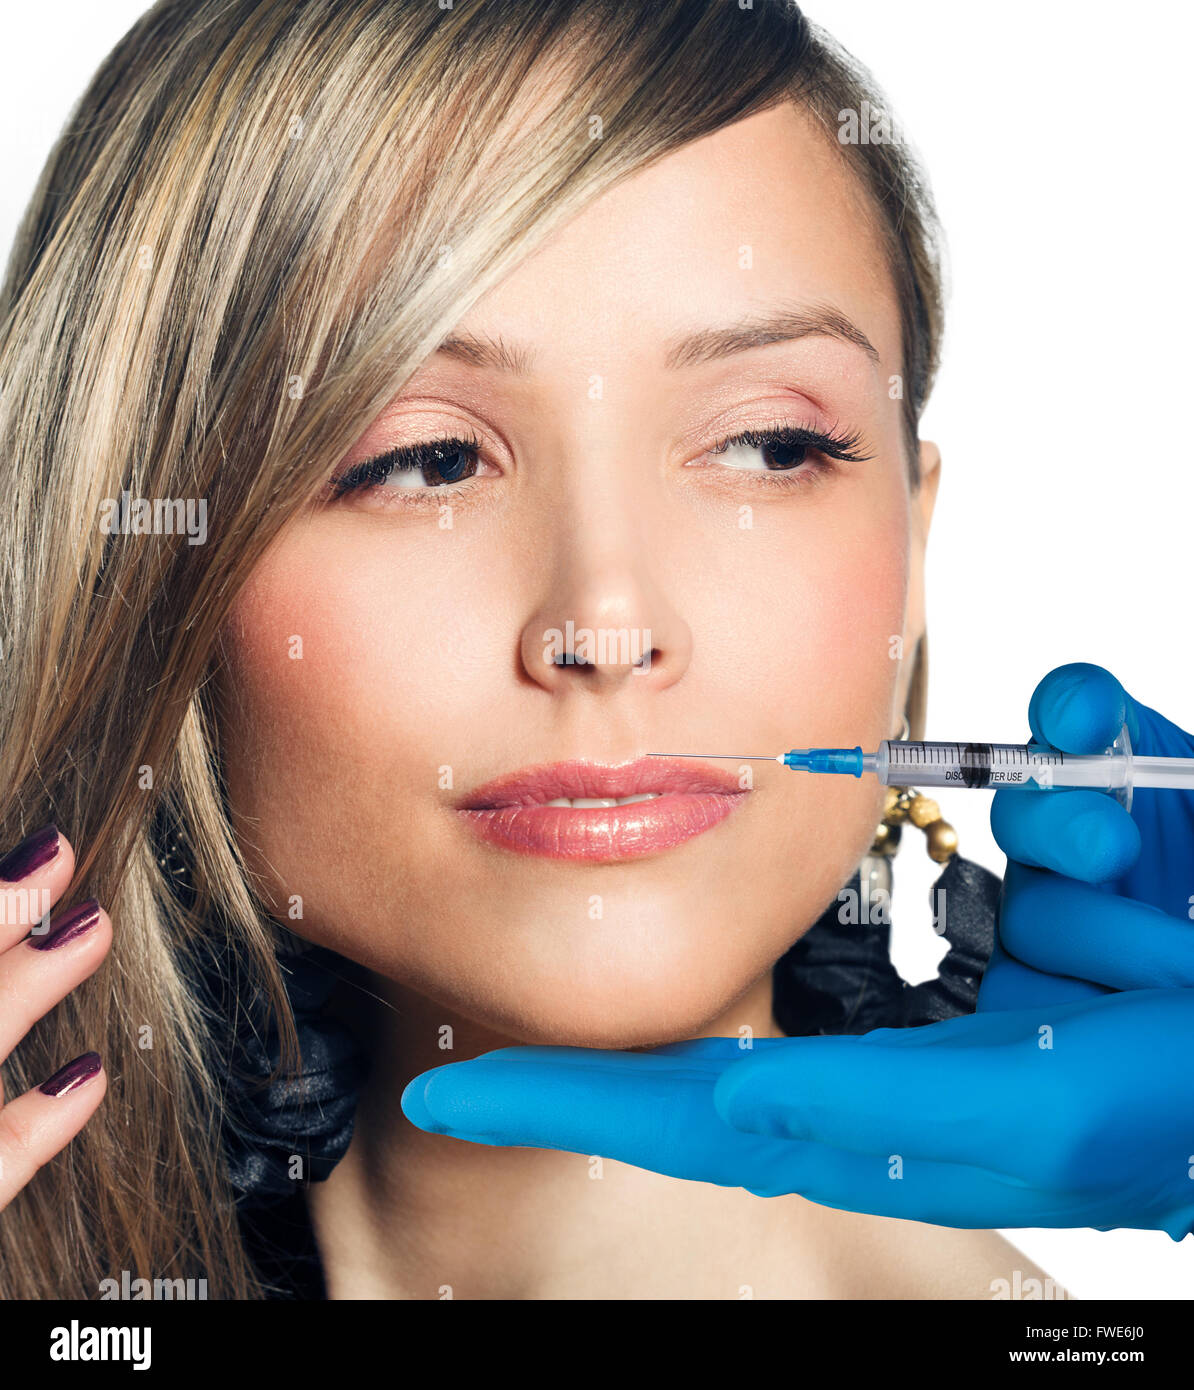 Young woman getting cosmetic injection Stock Photo